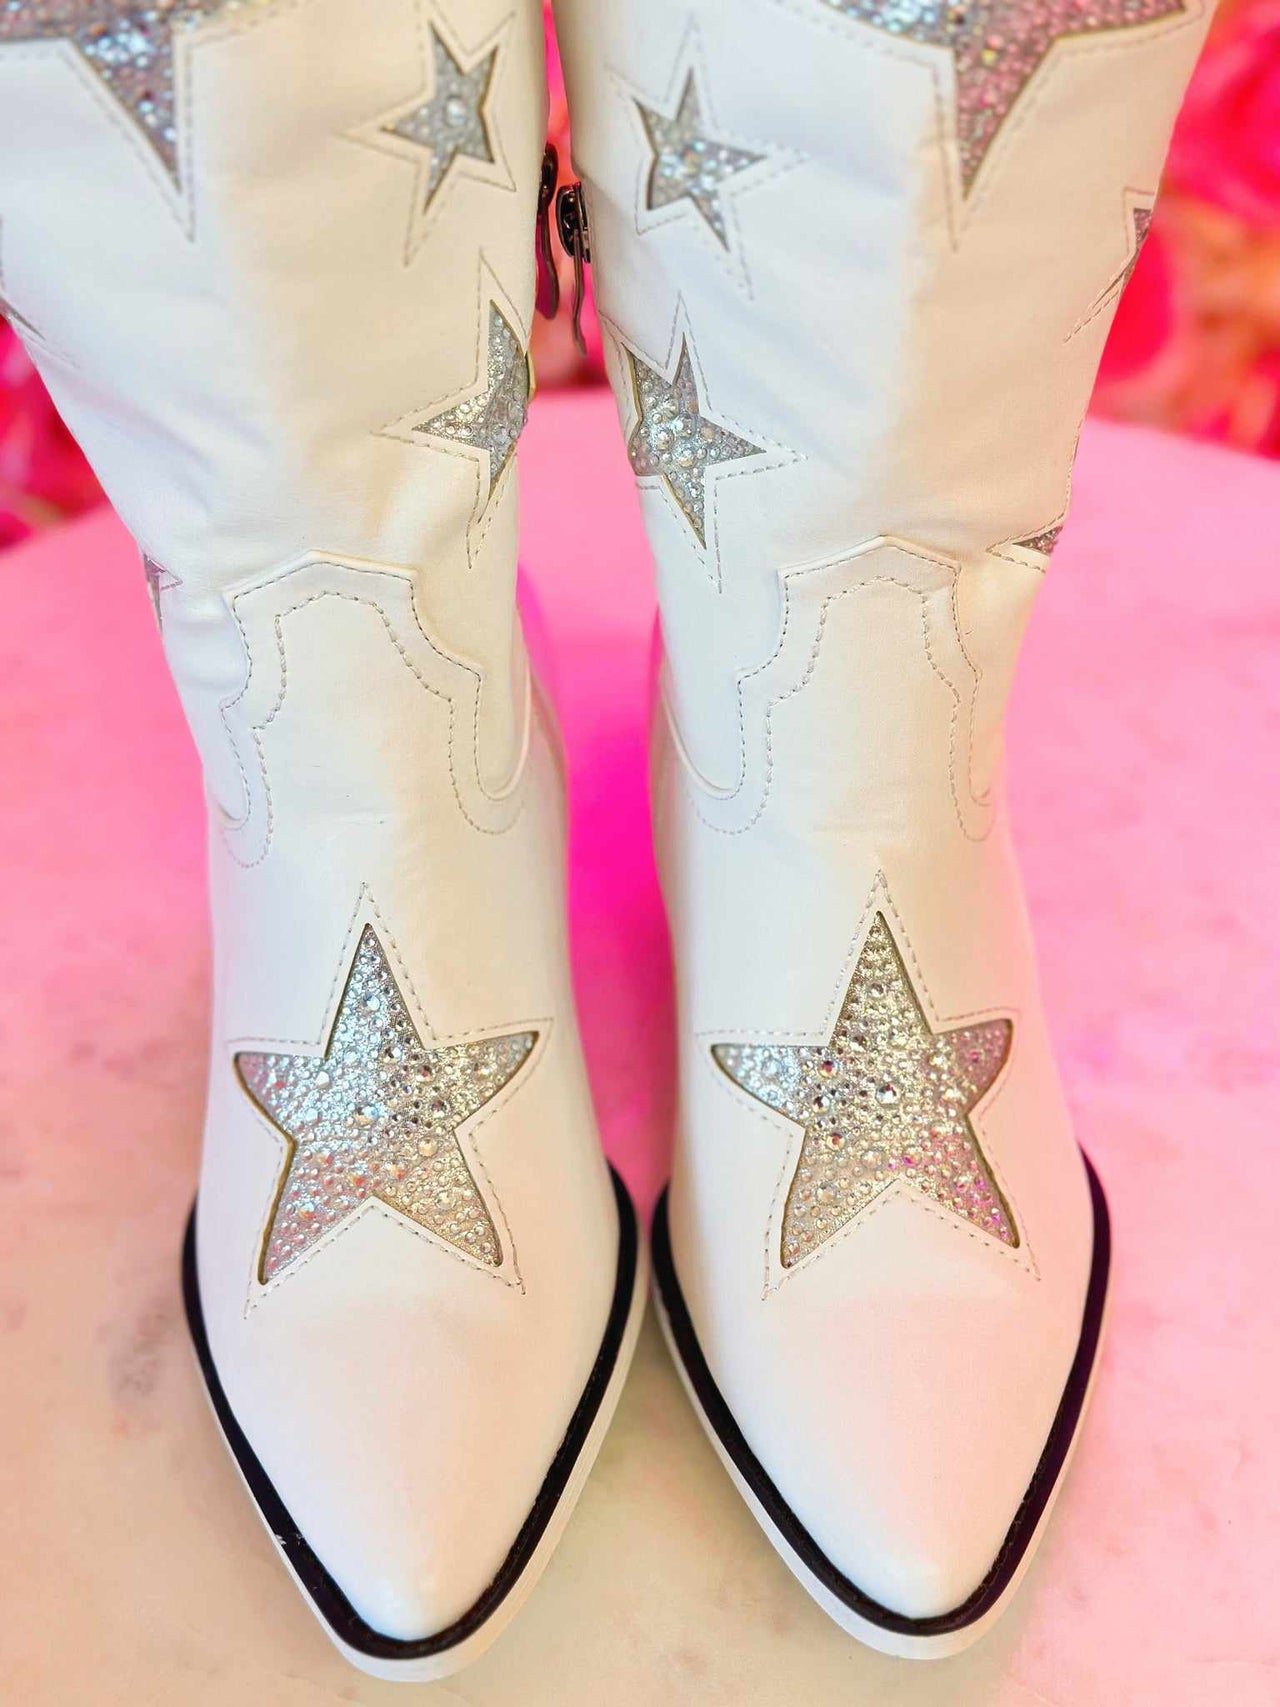 The Lainey Star Wide Boots - White